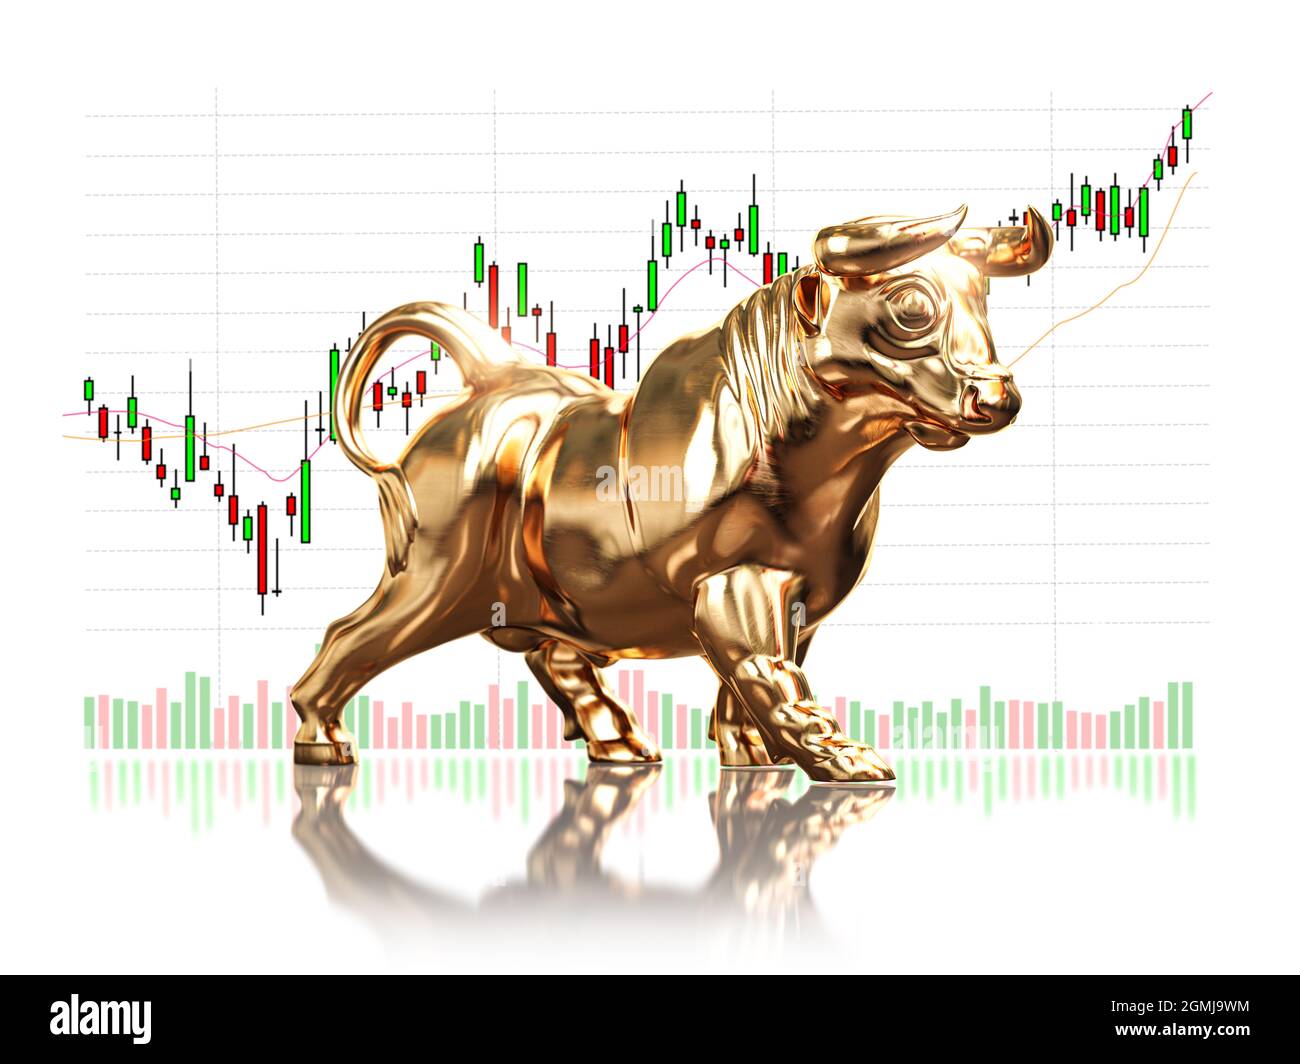 Bull Market Stock Photos and Images - 123RF